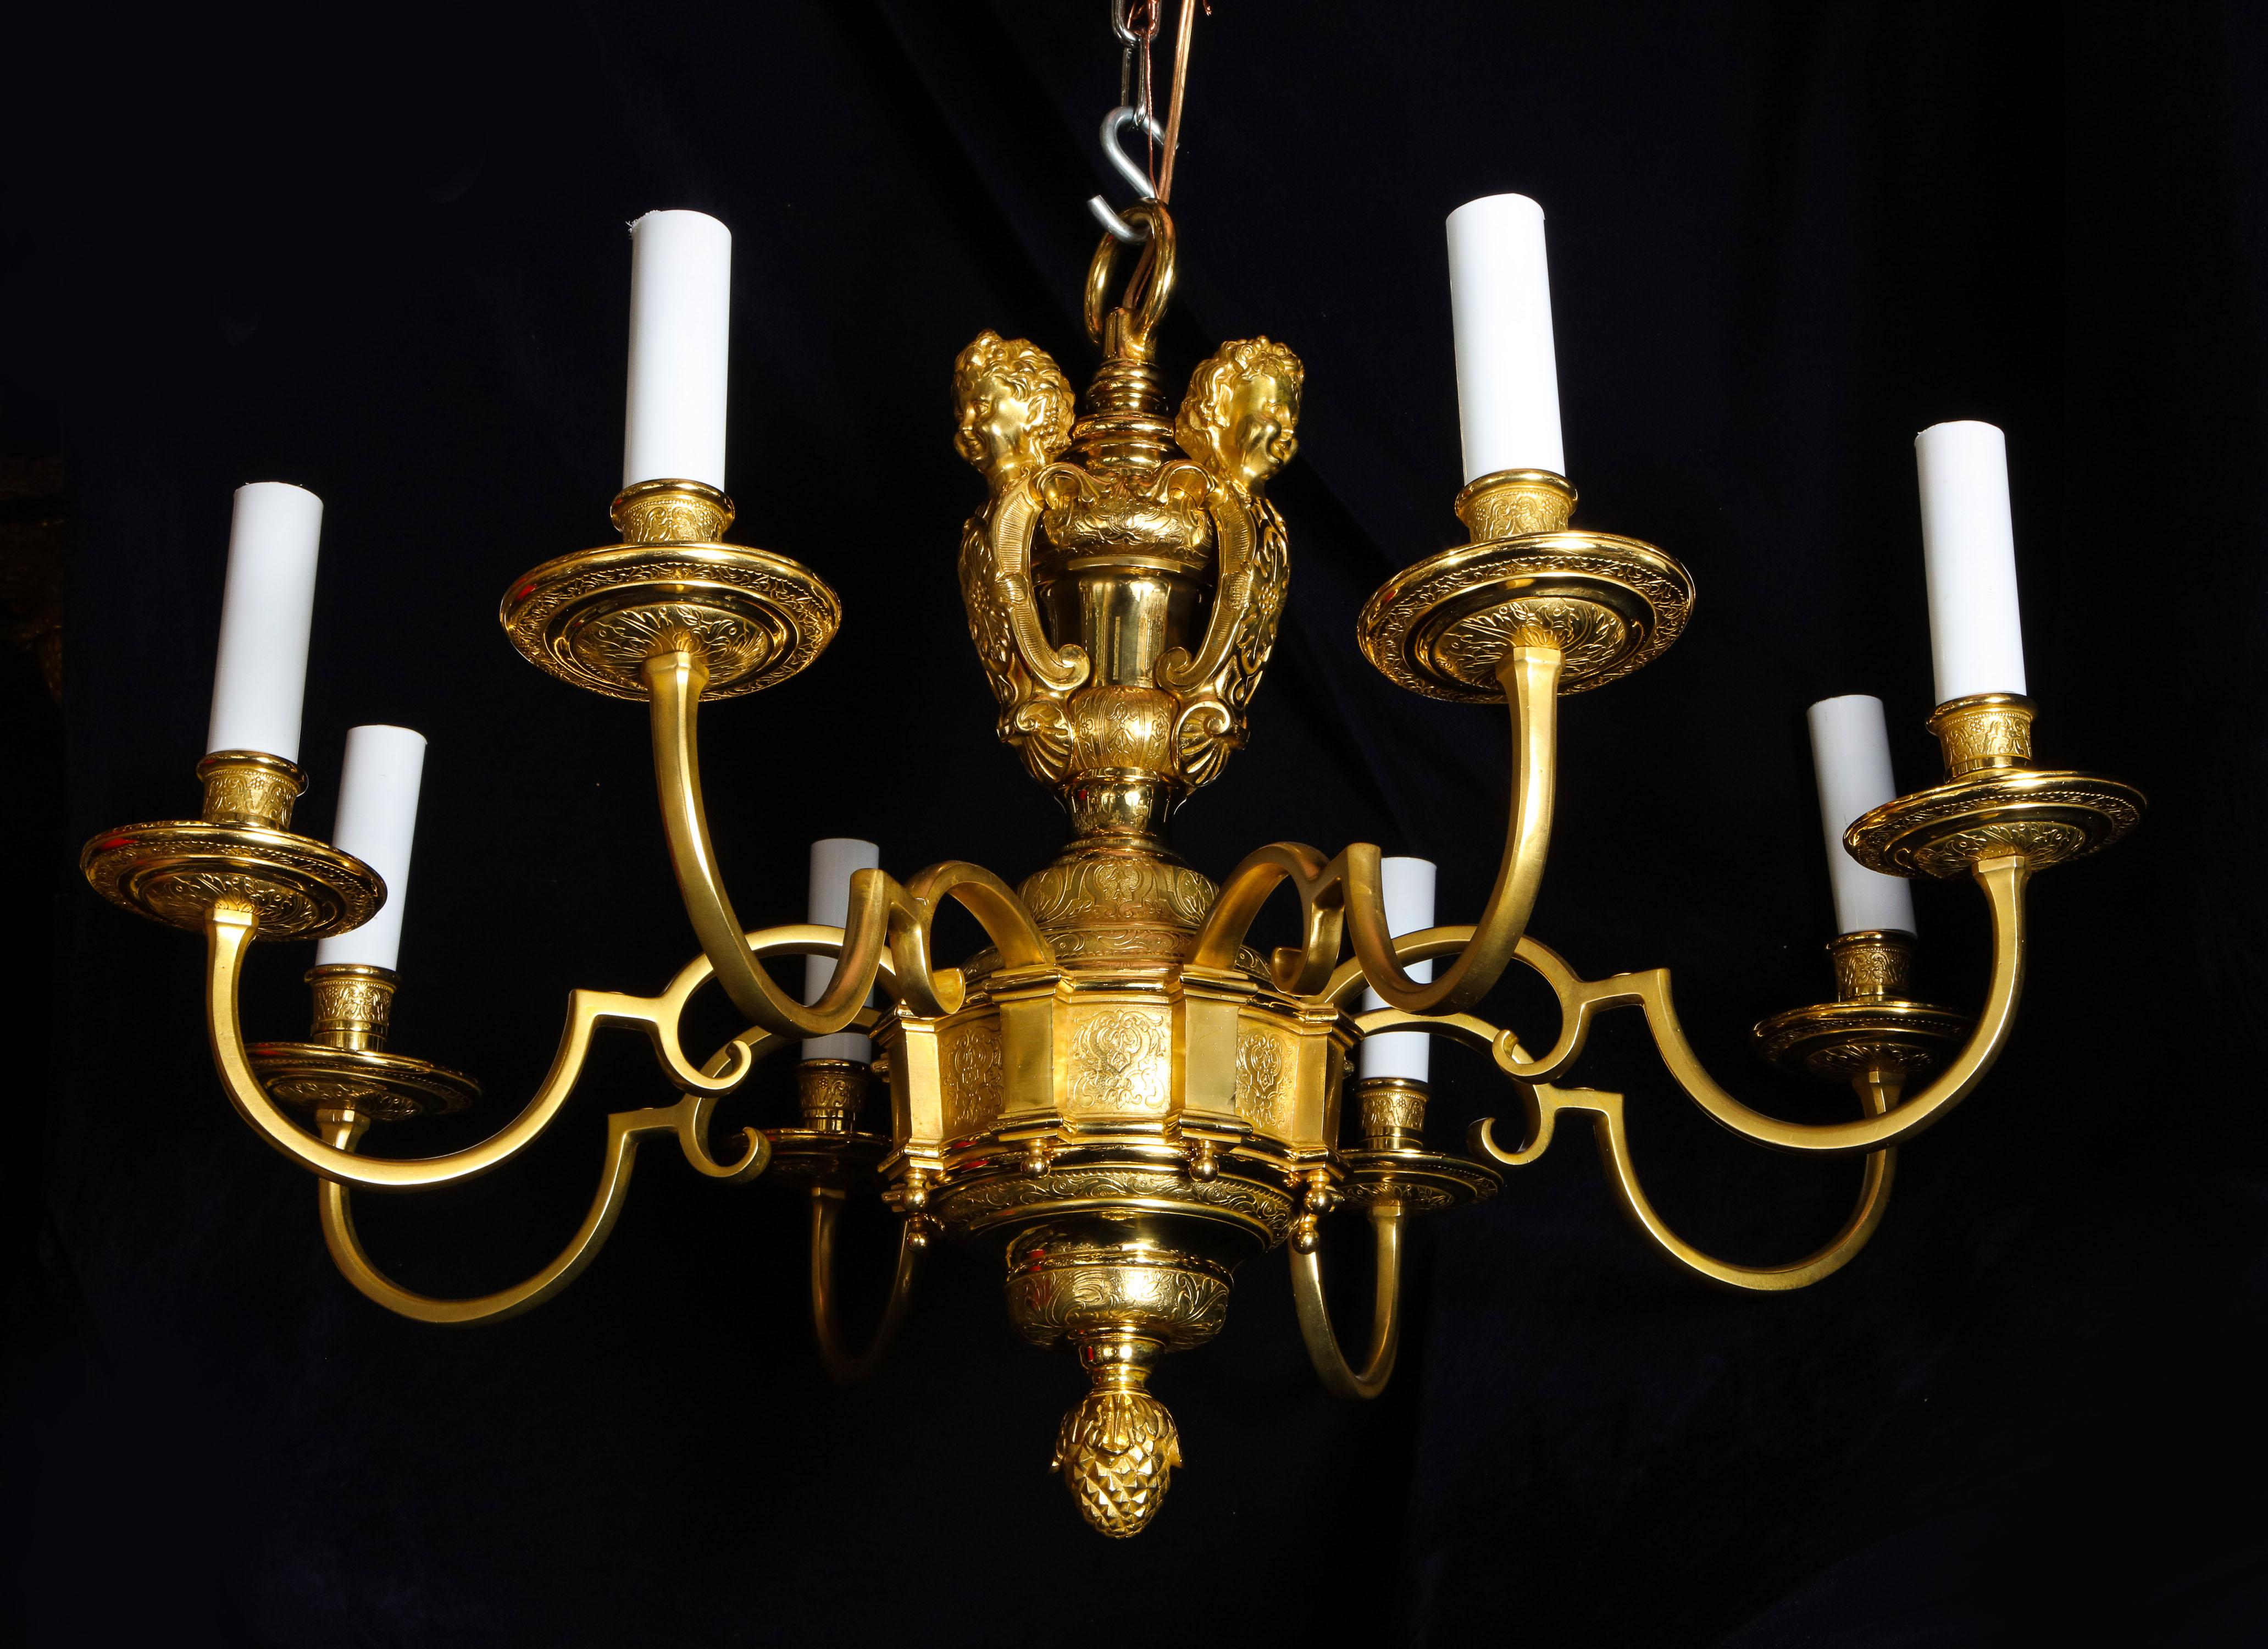 Pair of Fine Antique French Louis XVI Style Gilt Bronze Figural Chandeliers For Sale 5